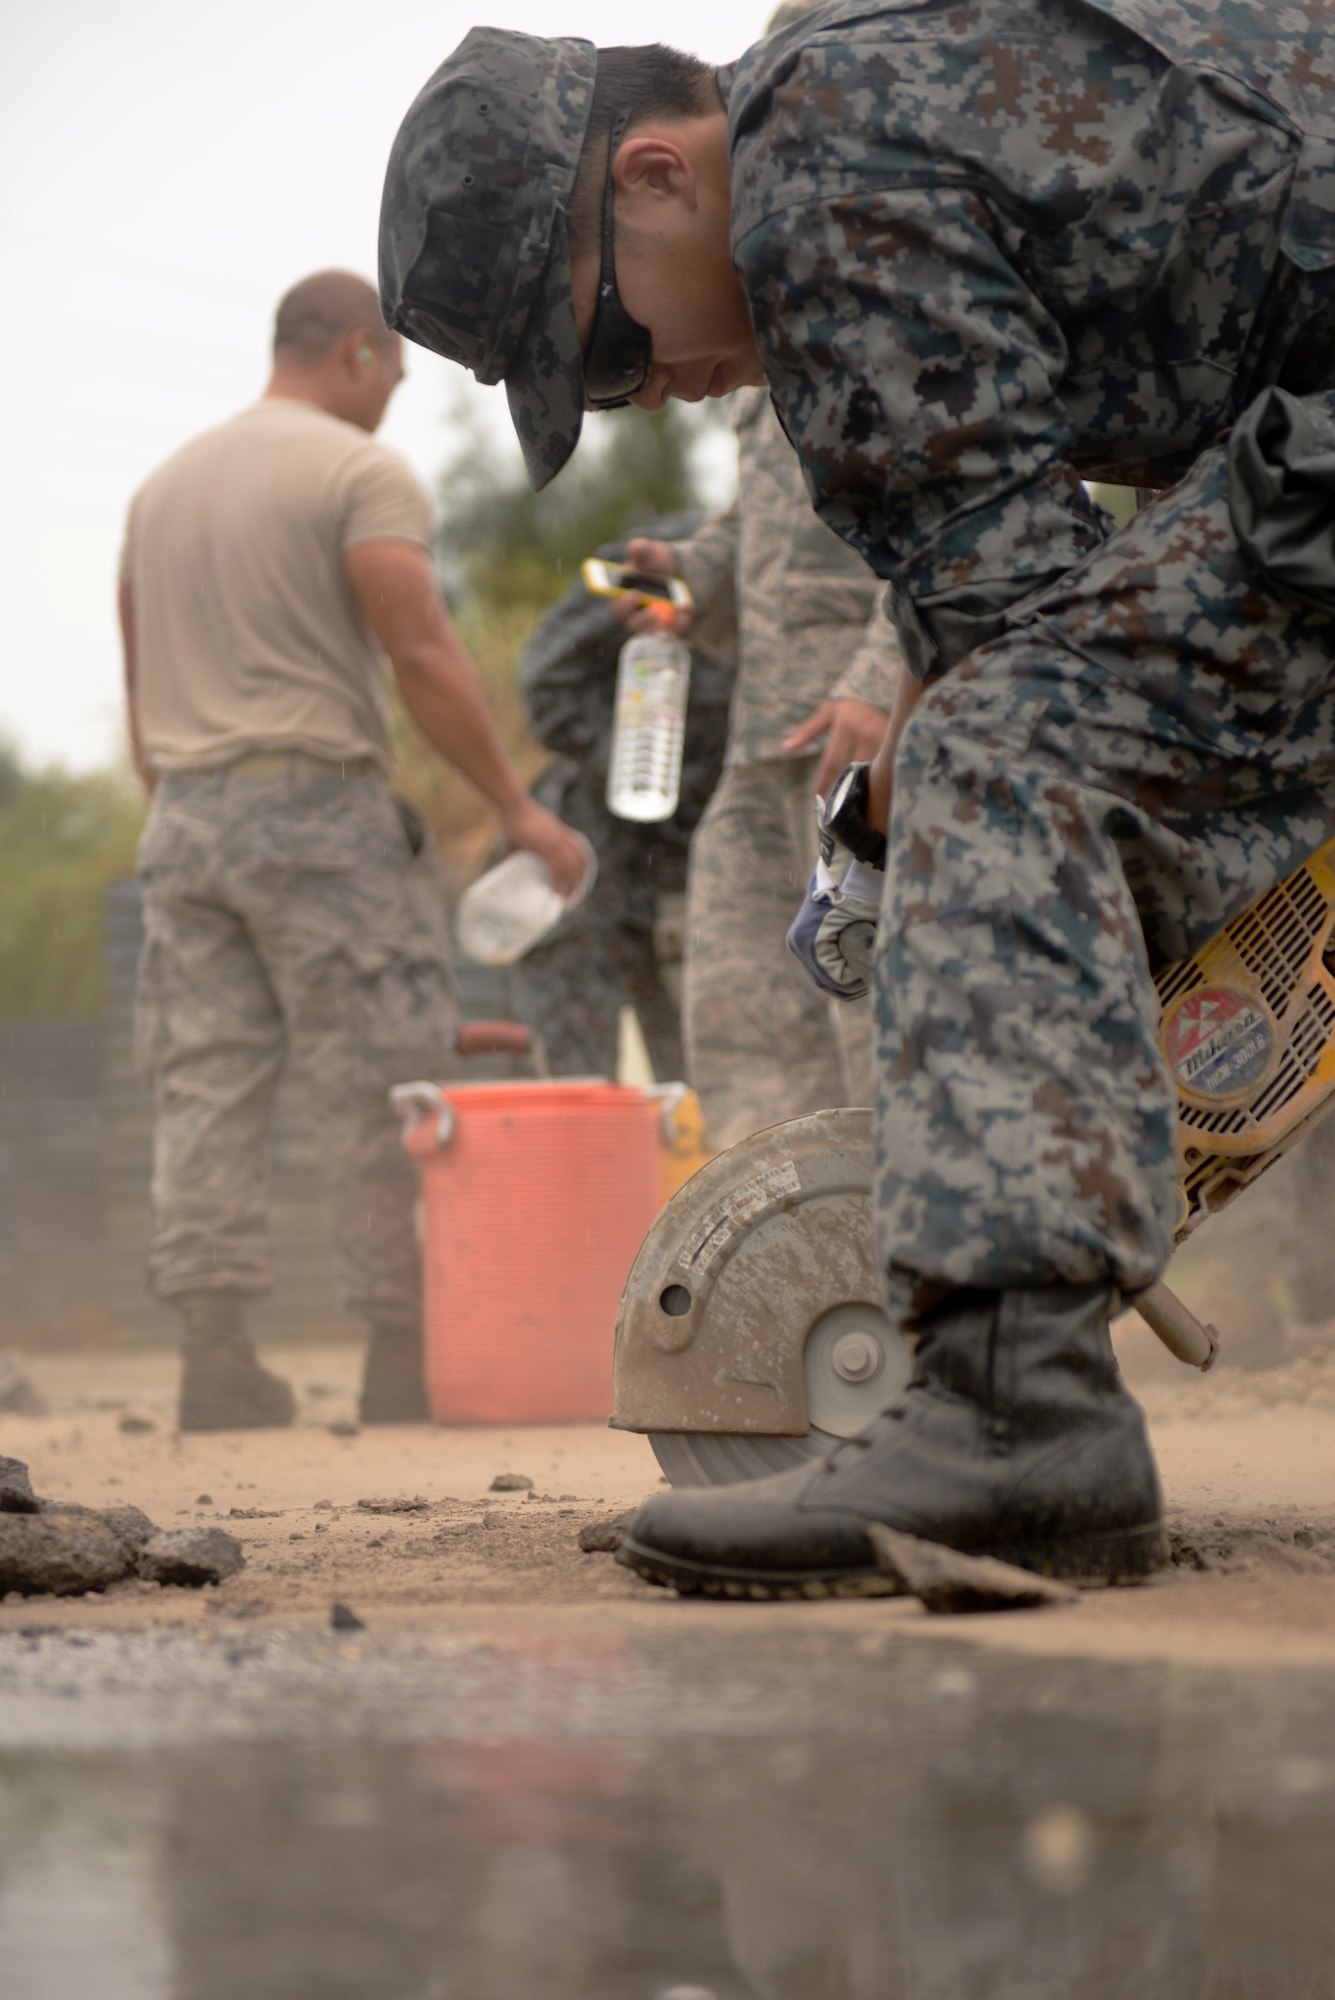 Japan Air Self Defense Force Staff Sgt. Mutsuhiro Karasuyama, Southwestern Composite Air Division civil engineer, cuts out a slab of concrete during a rapid runway repair simulation, Oct. 22, 2015, on Kadena Air Base, Japan. JASDF civil engineers from Naha Air Base trained side-by-side with Airmen from the 18th Civil Engineer Squadron to build bilateral relations and improve their combined runway repair capabilities. (U.S. Air Force photo by Senior Airman Omari Bernard)